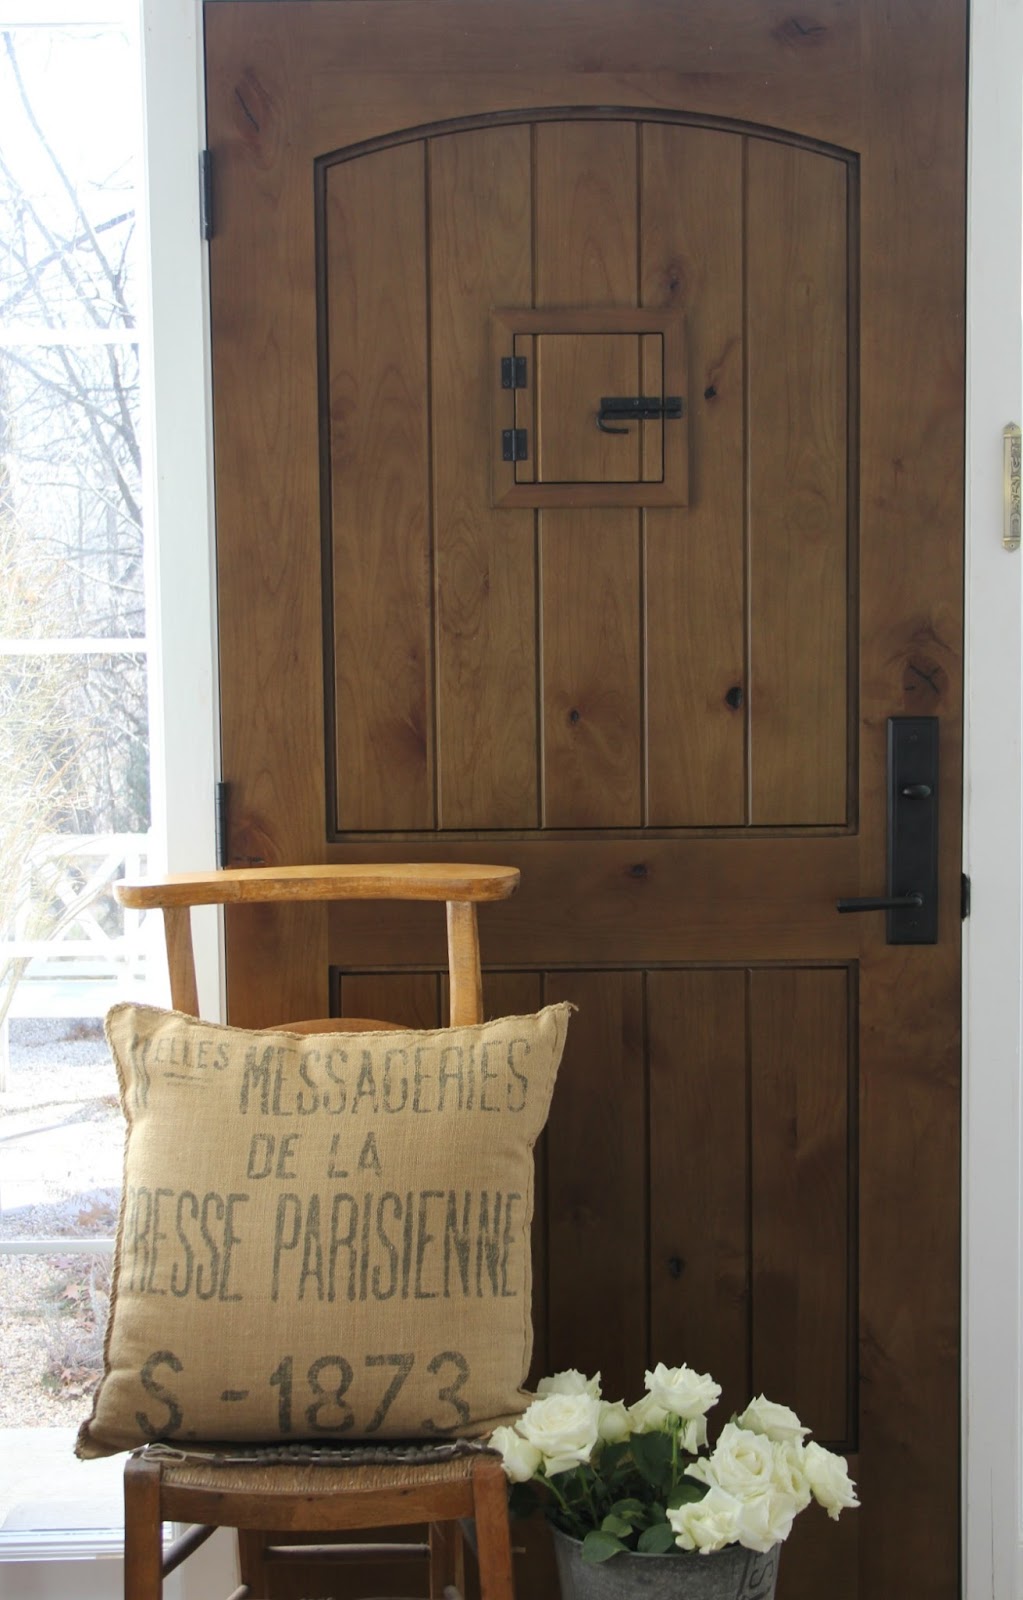 My rustic alder front door - Hello Lovely Studio. Rustic Old World Style Wood Doors [Design Inspiration] with photos of doors old and new to inspire your design ideas.